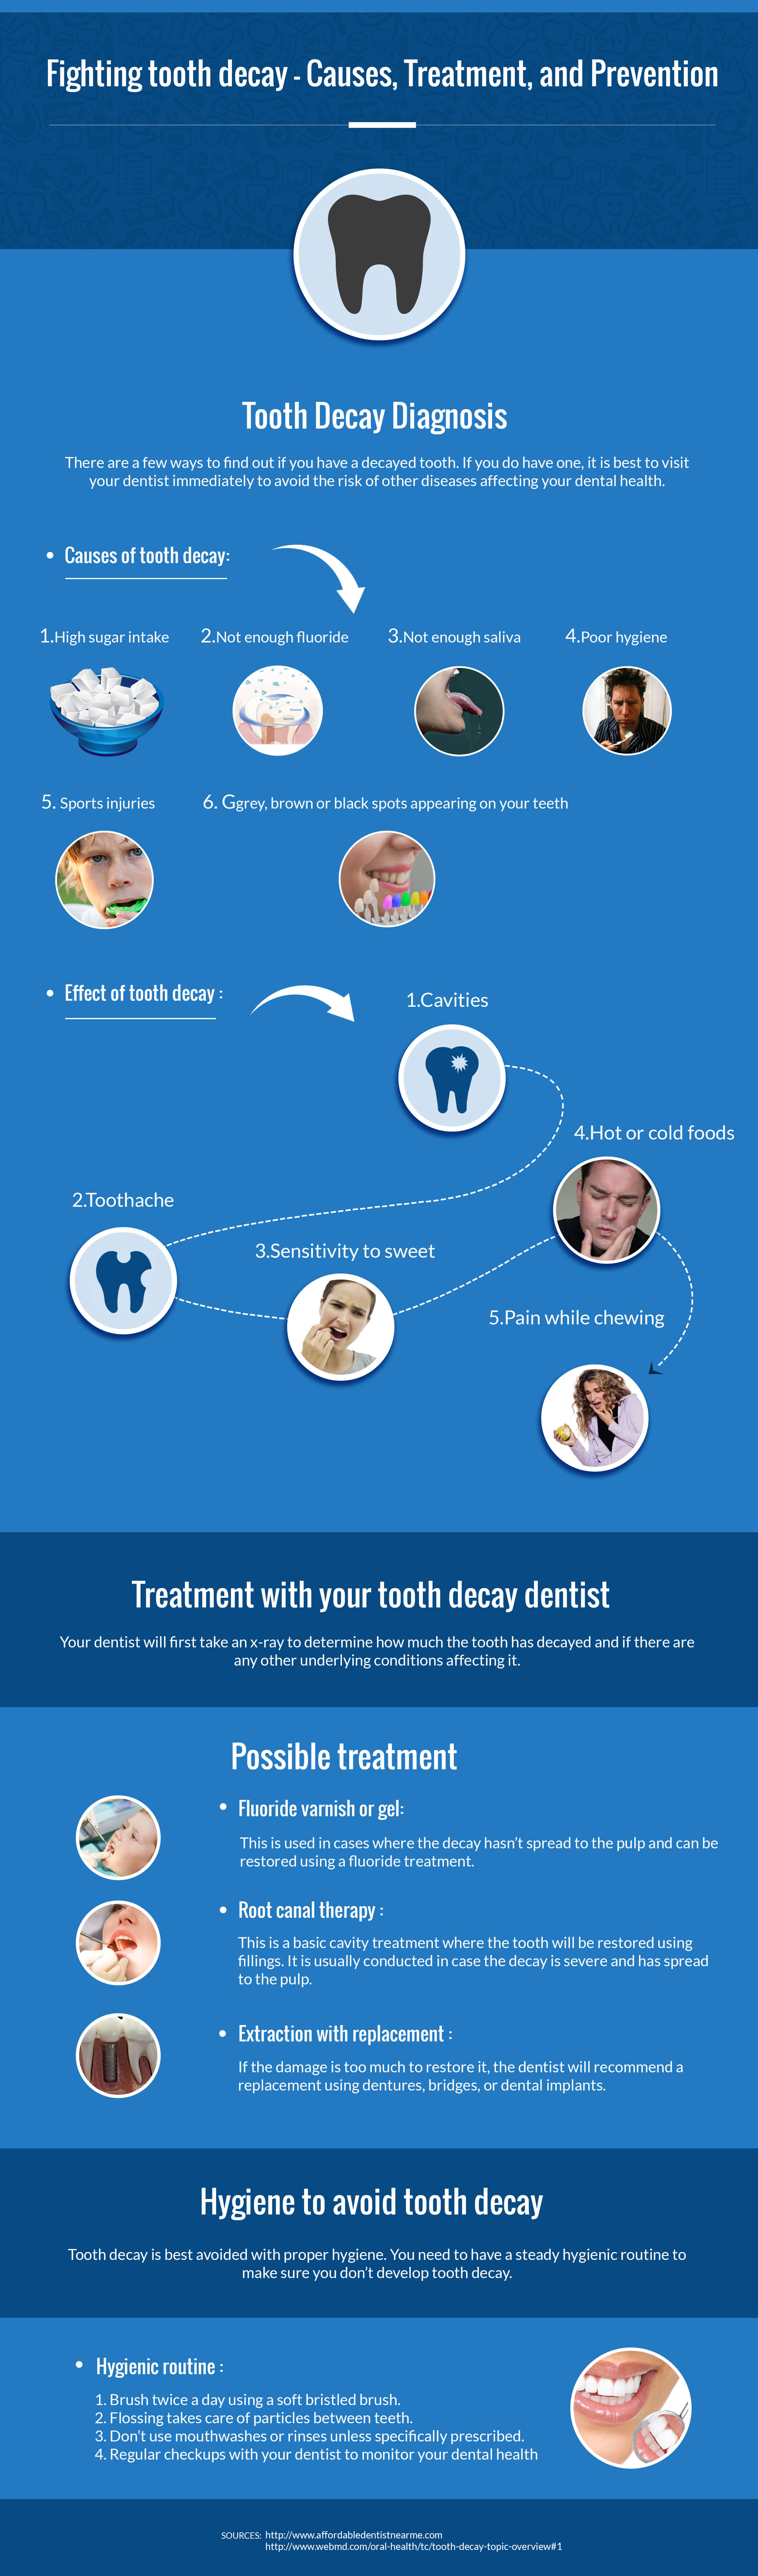 Dental care After tooth decay